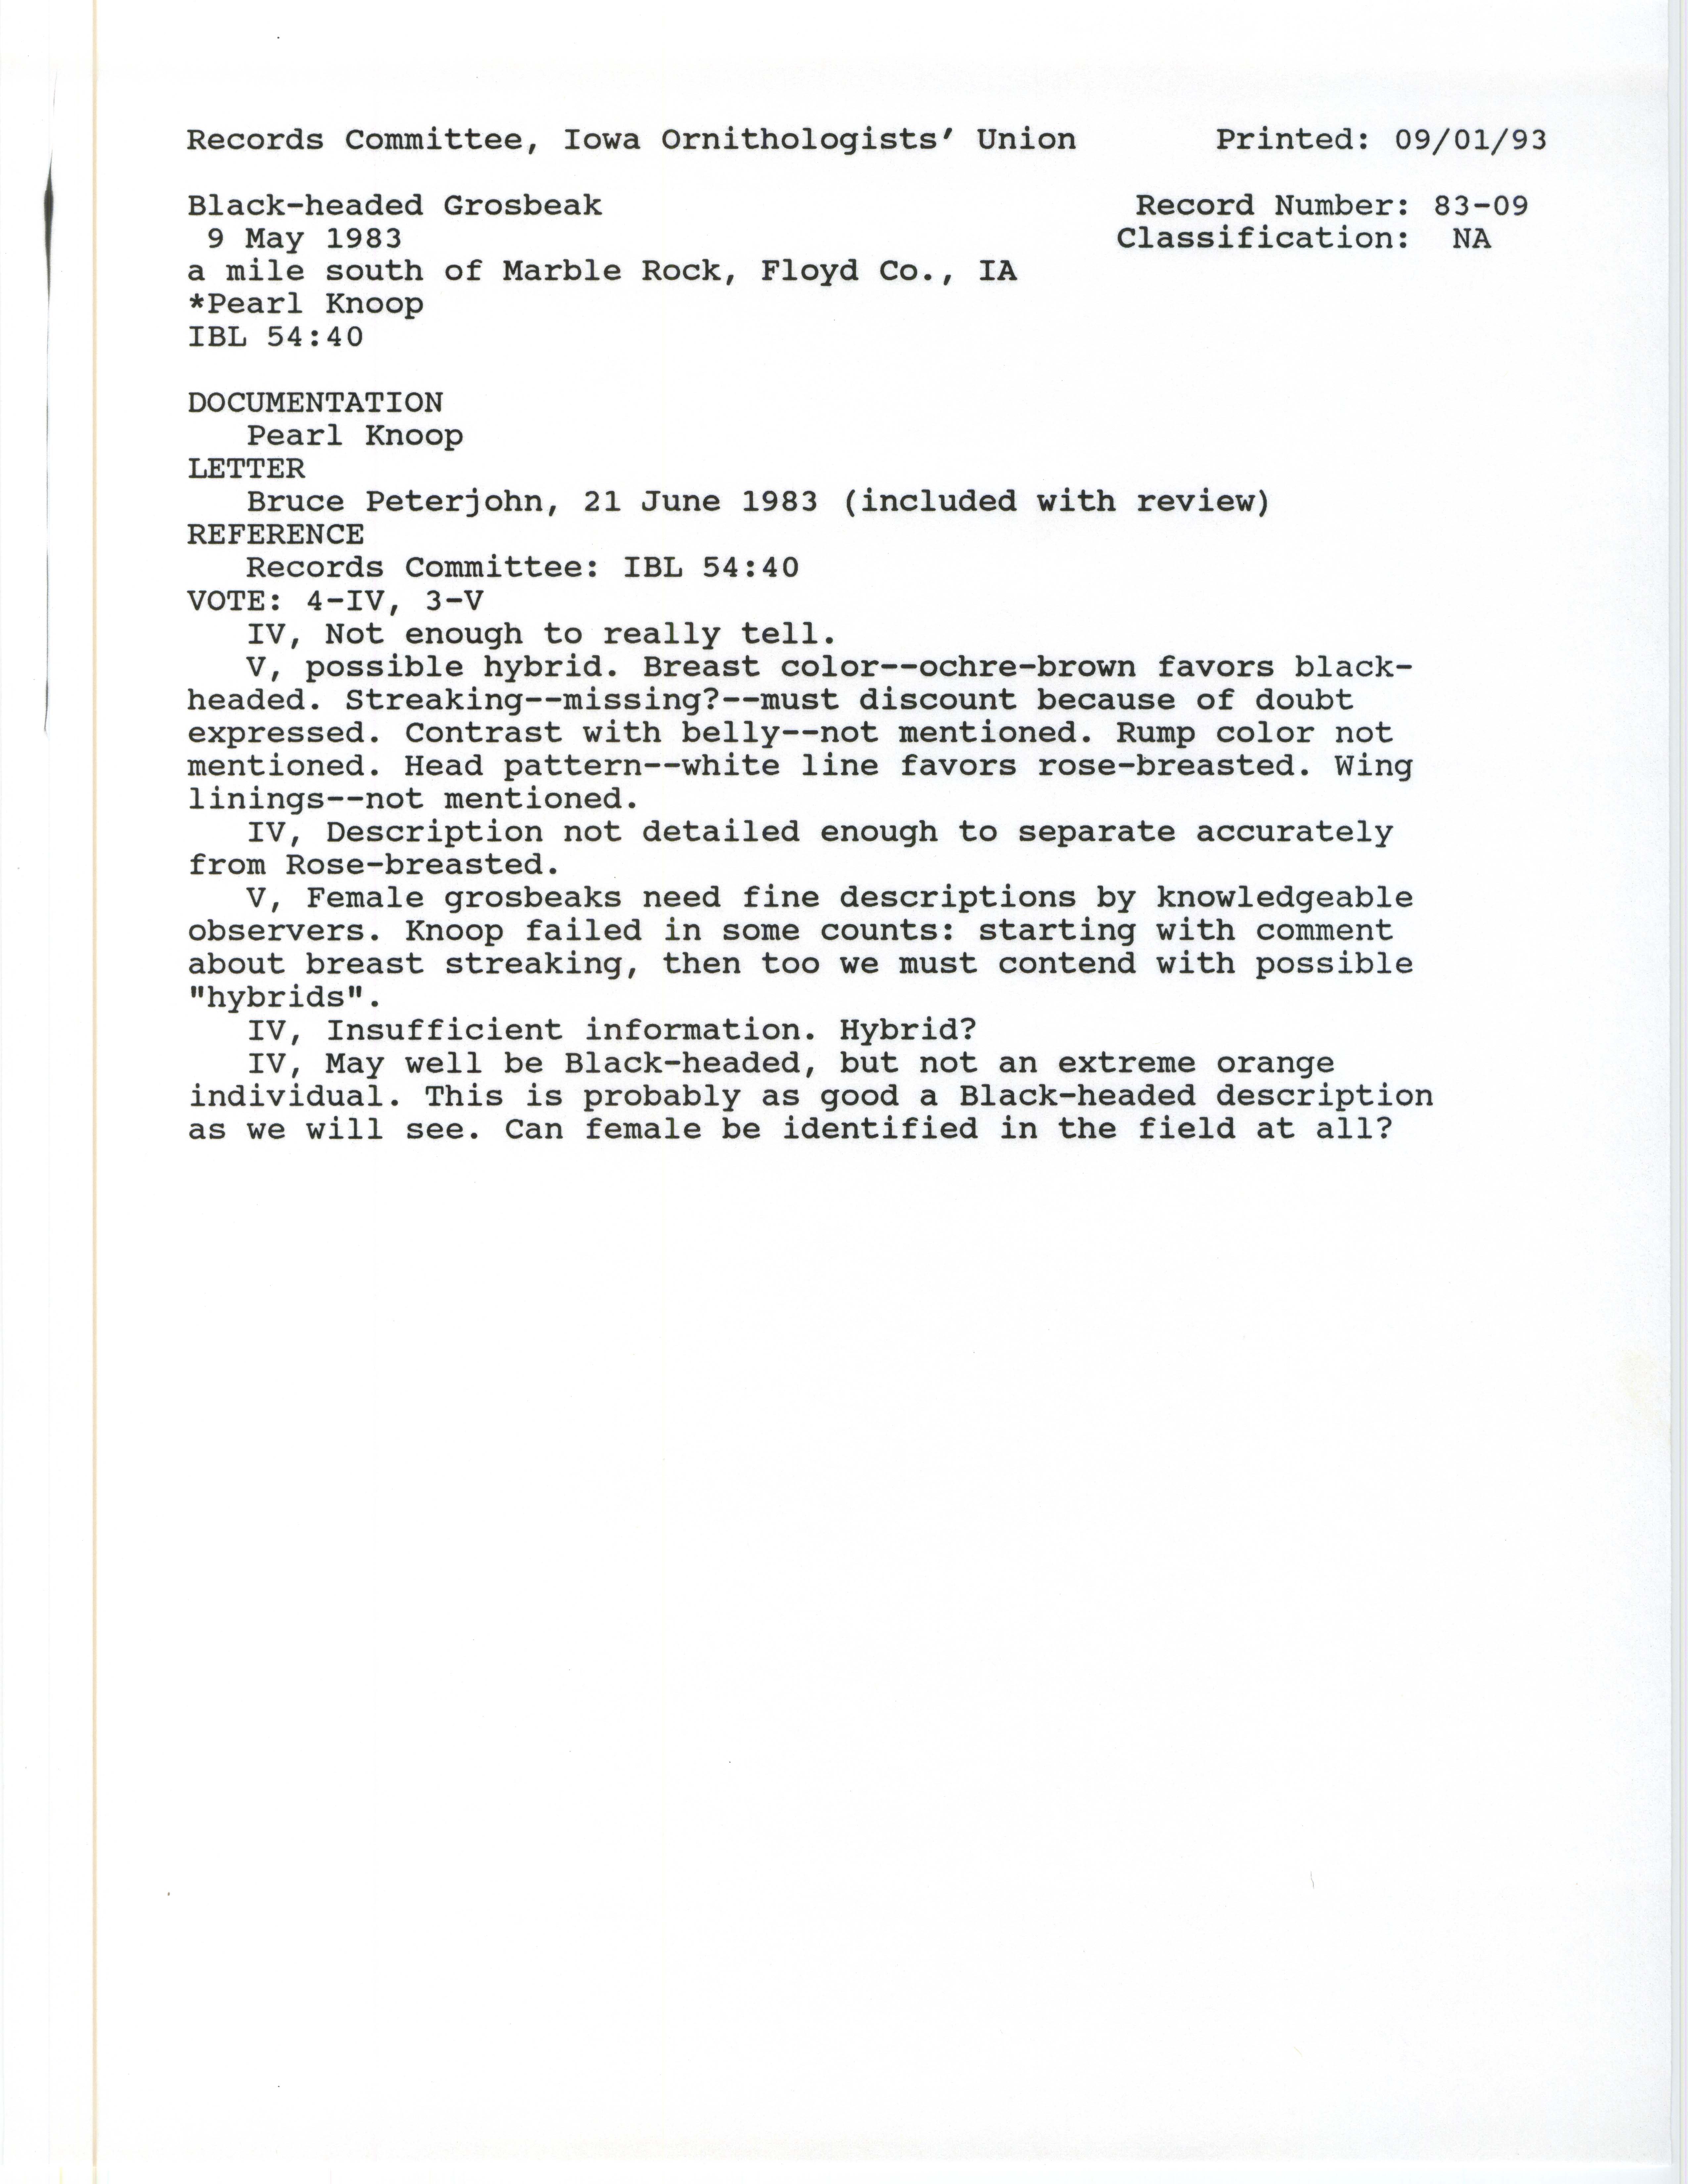 Records Committee review for rare bird sighting for Black-headed Grosbeak at Marble Rock, 1983